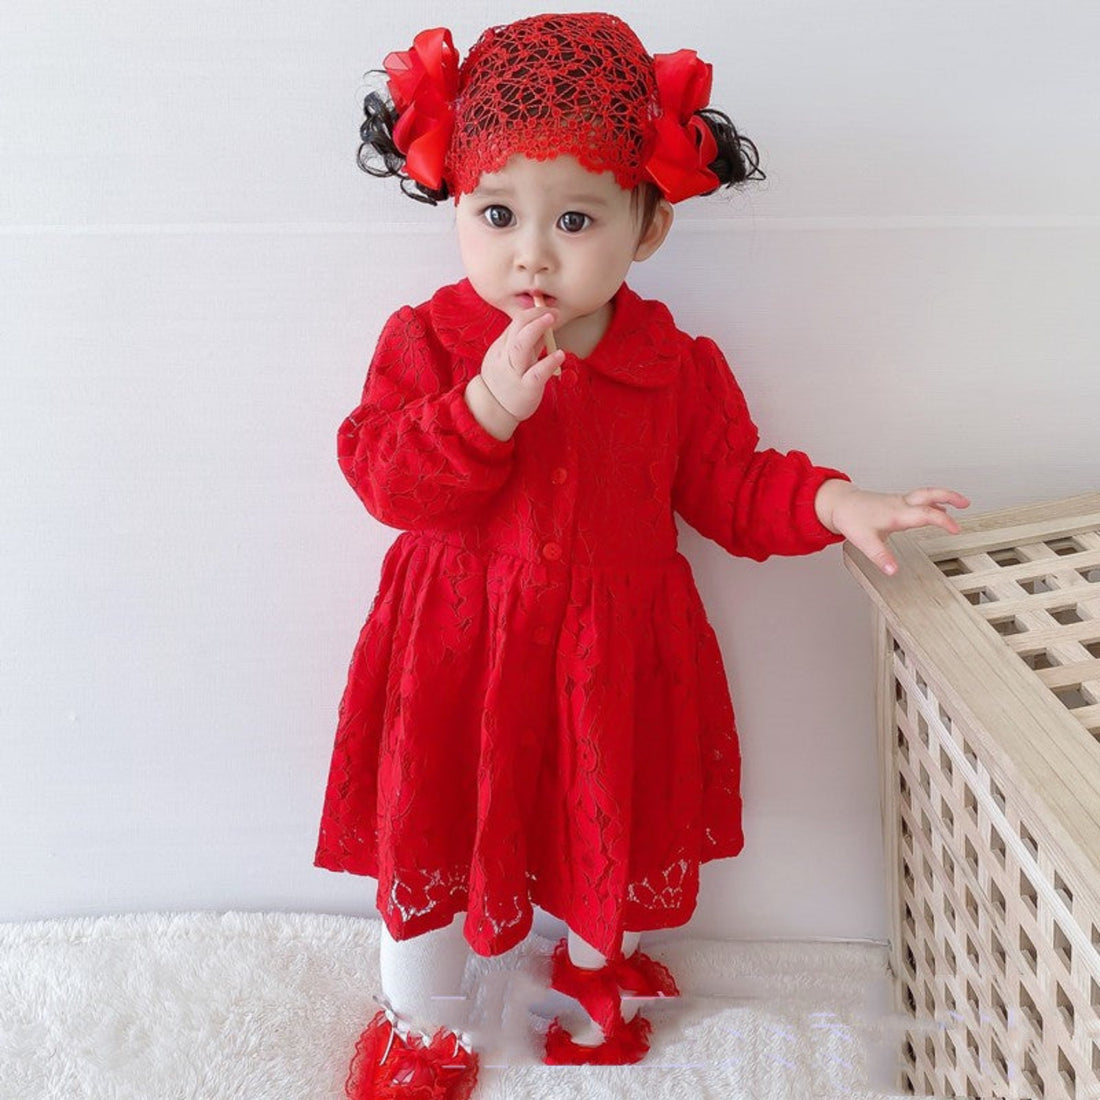 Close-up of a red baby girl dress with delicate lace and a cute bow.